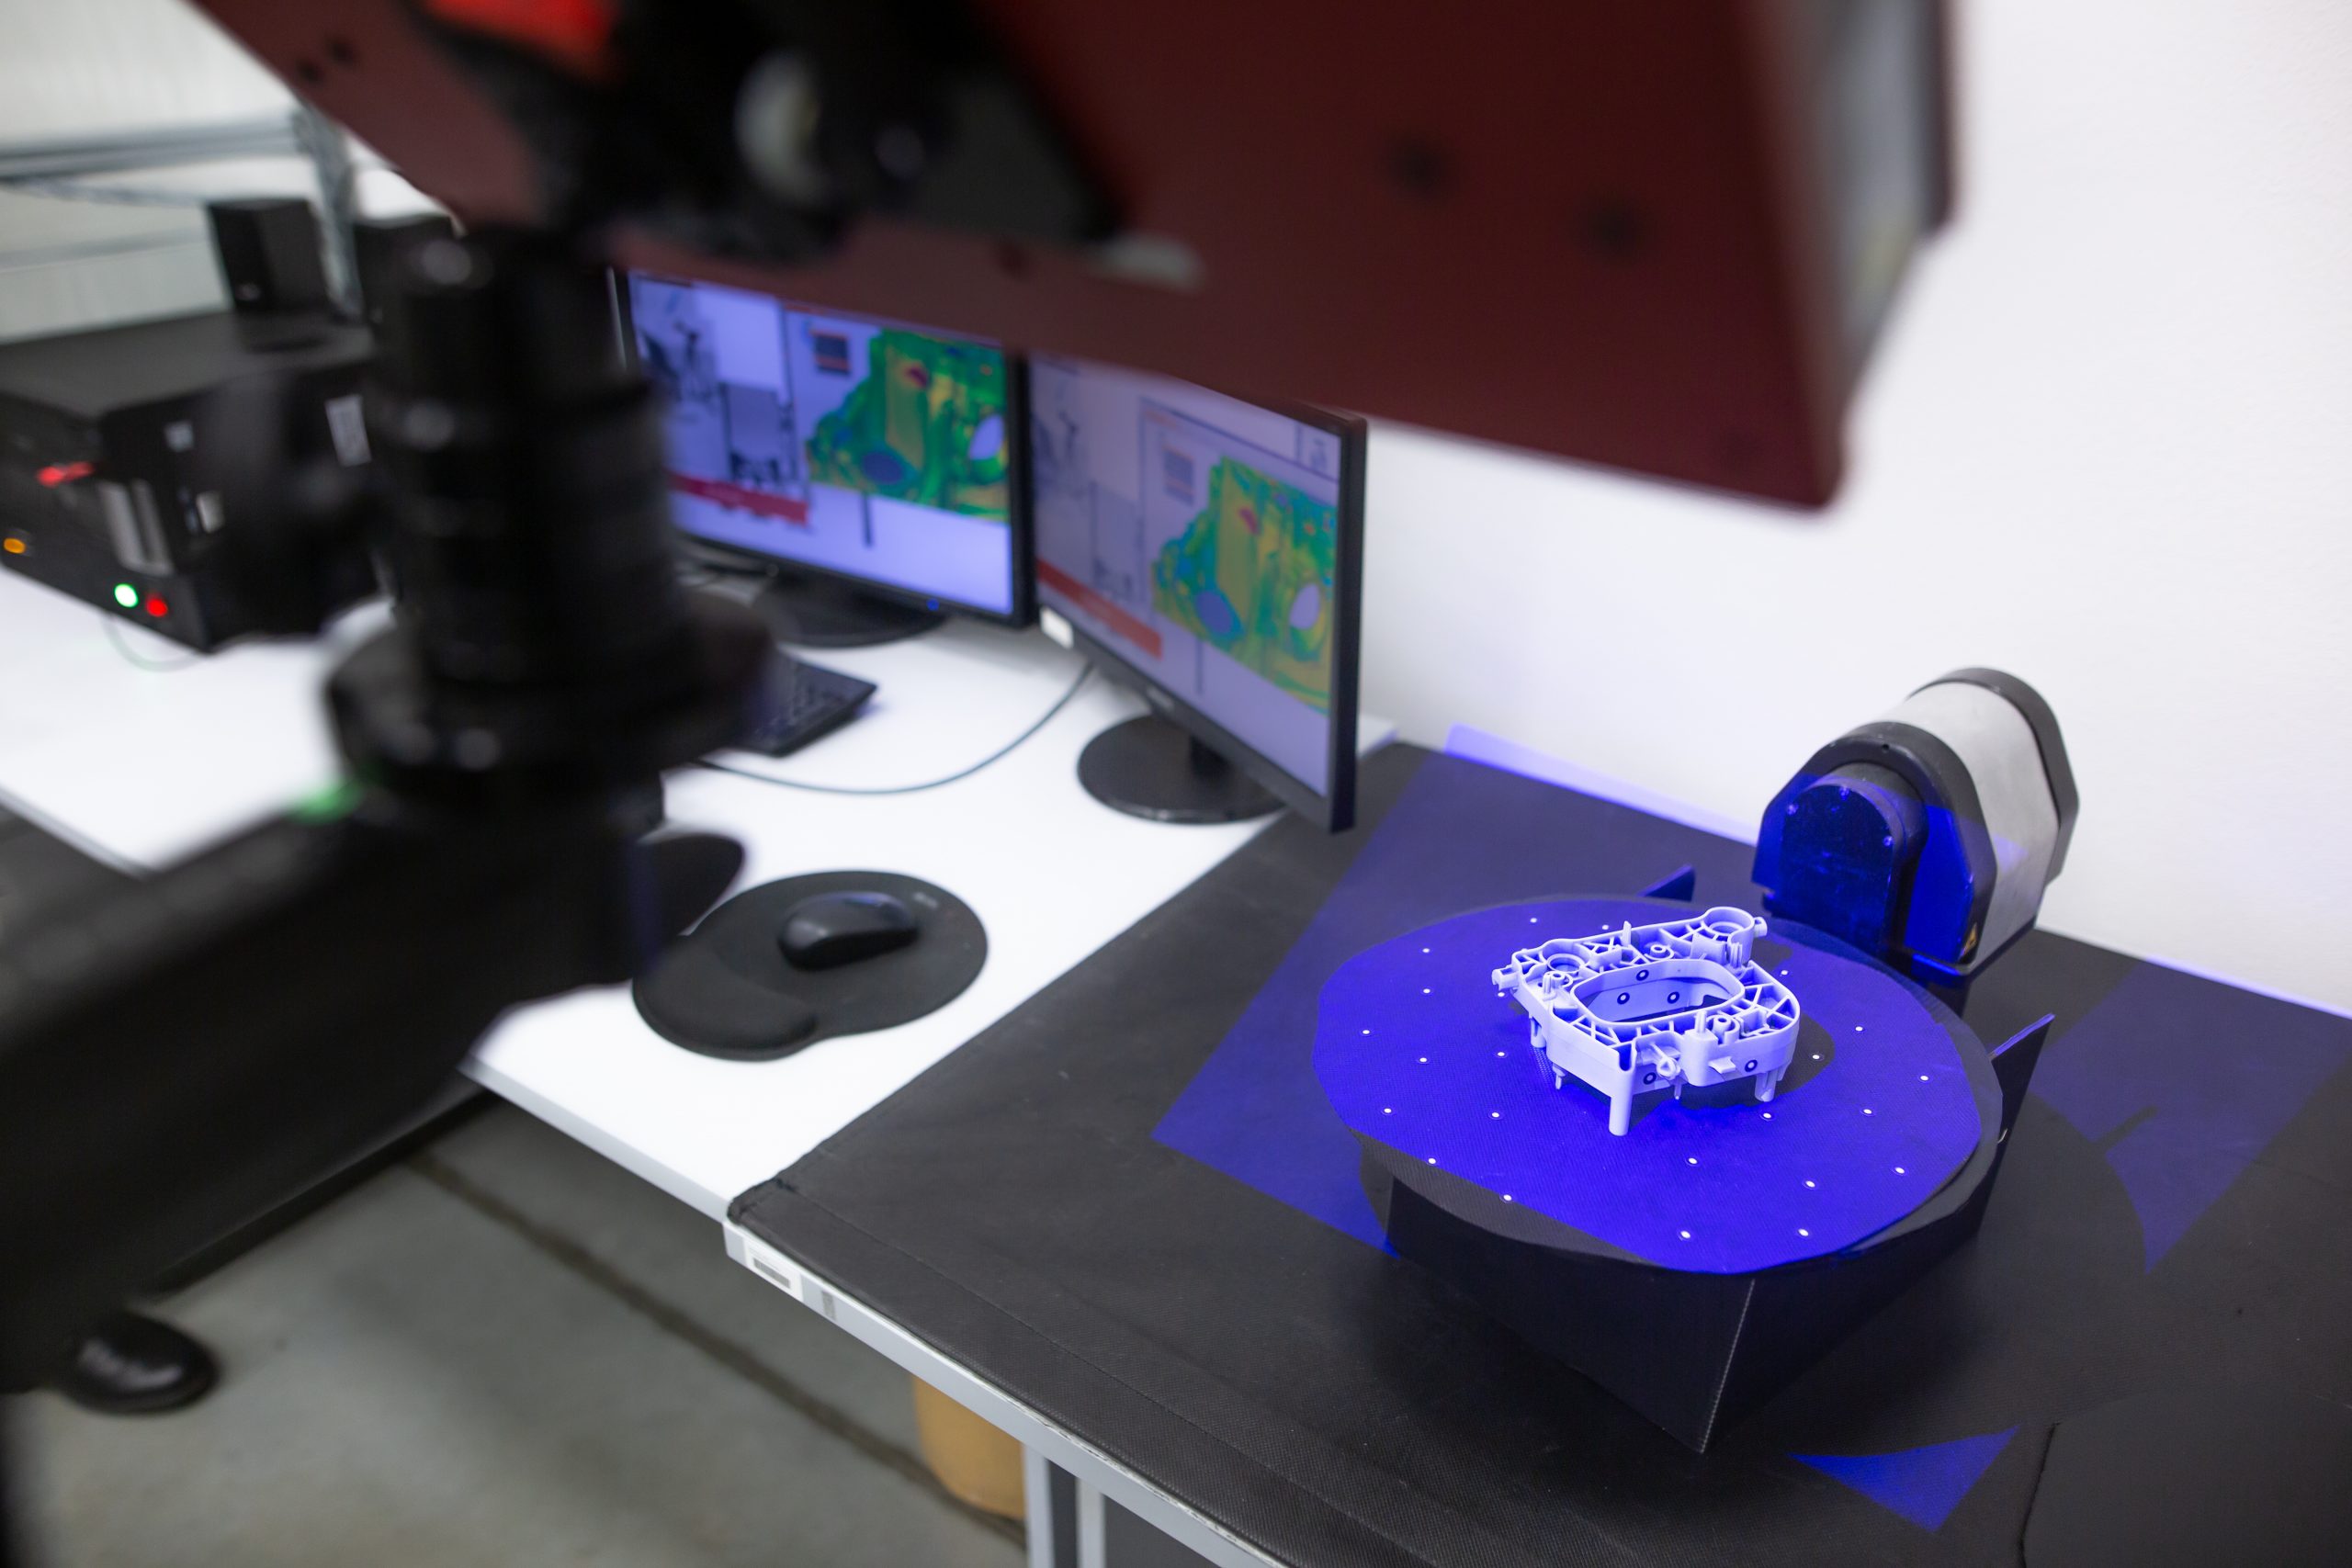 Professional 3D scanner scanning an industrial object plastic molding placed on a turntable